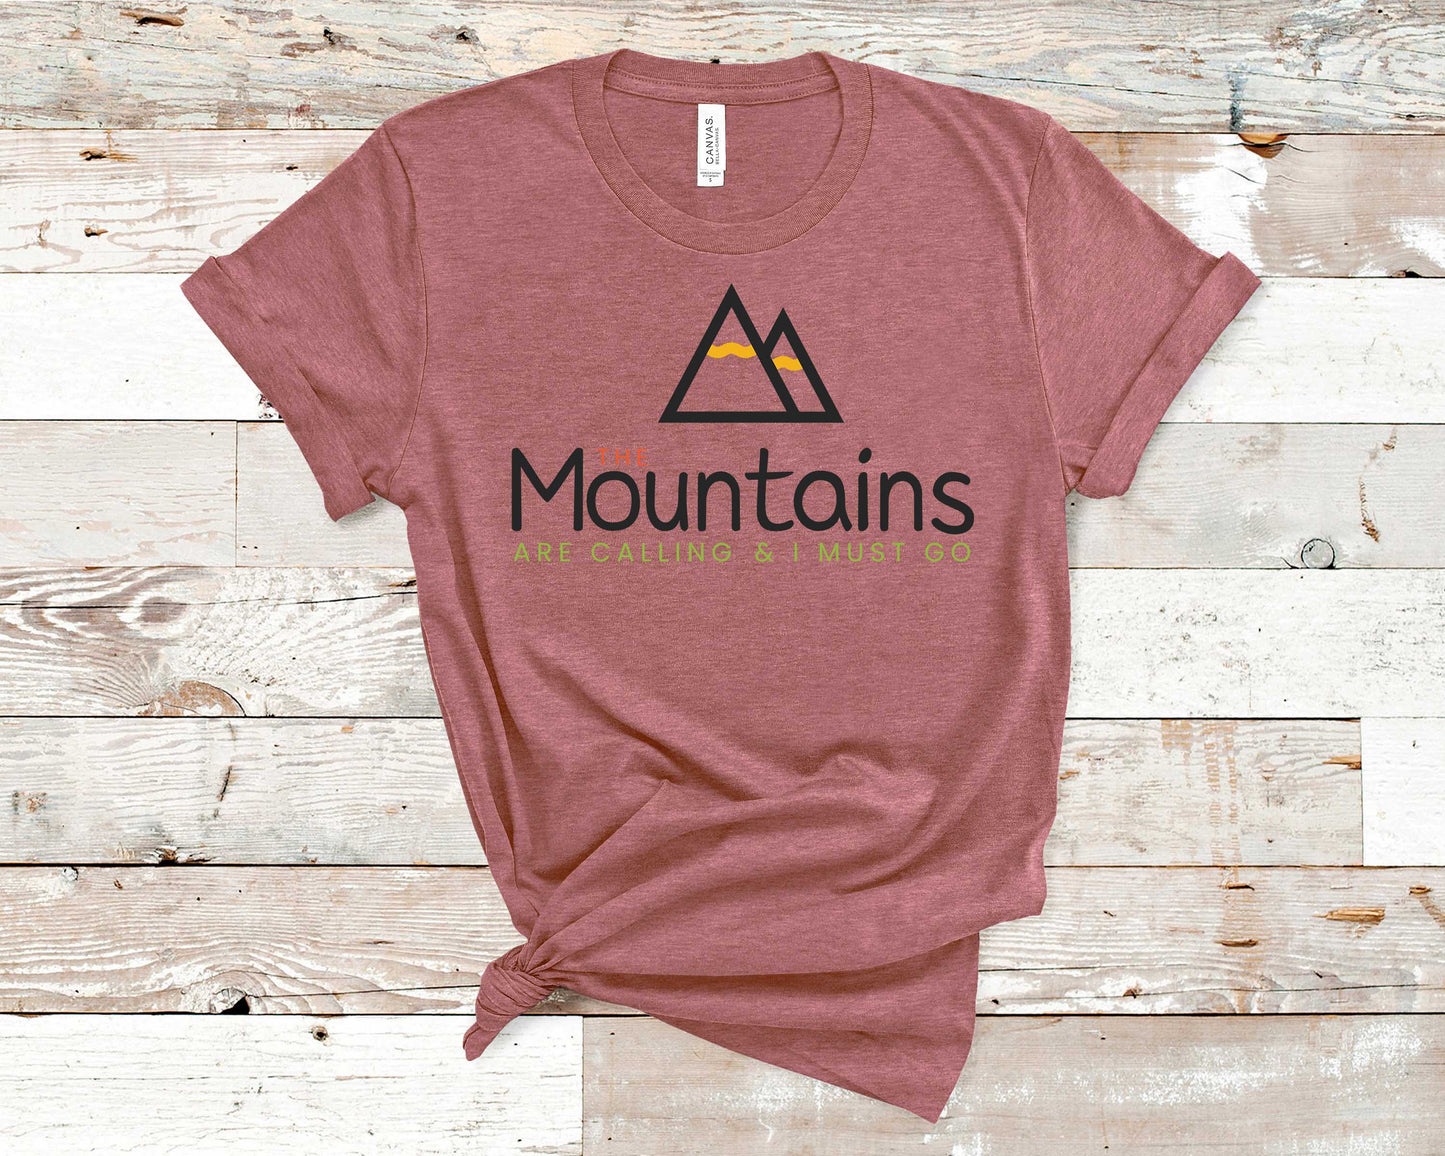 The Mountains are Calling Me and I Must Go - Fitness Shirt